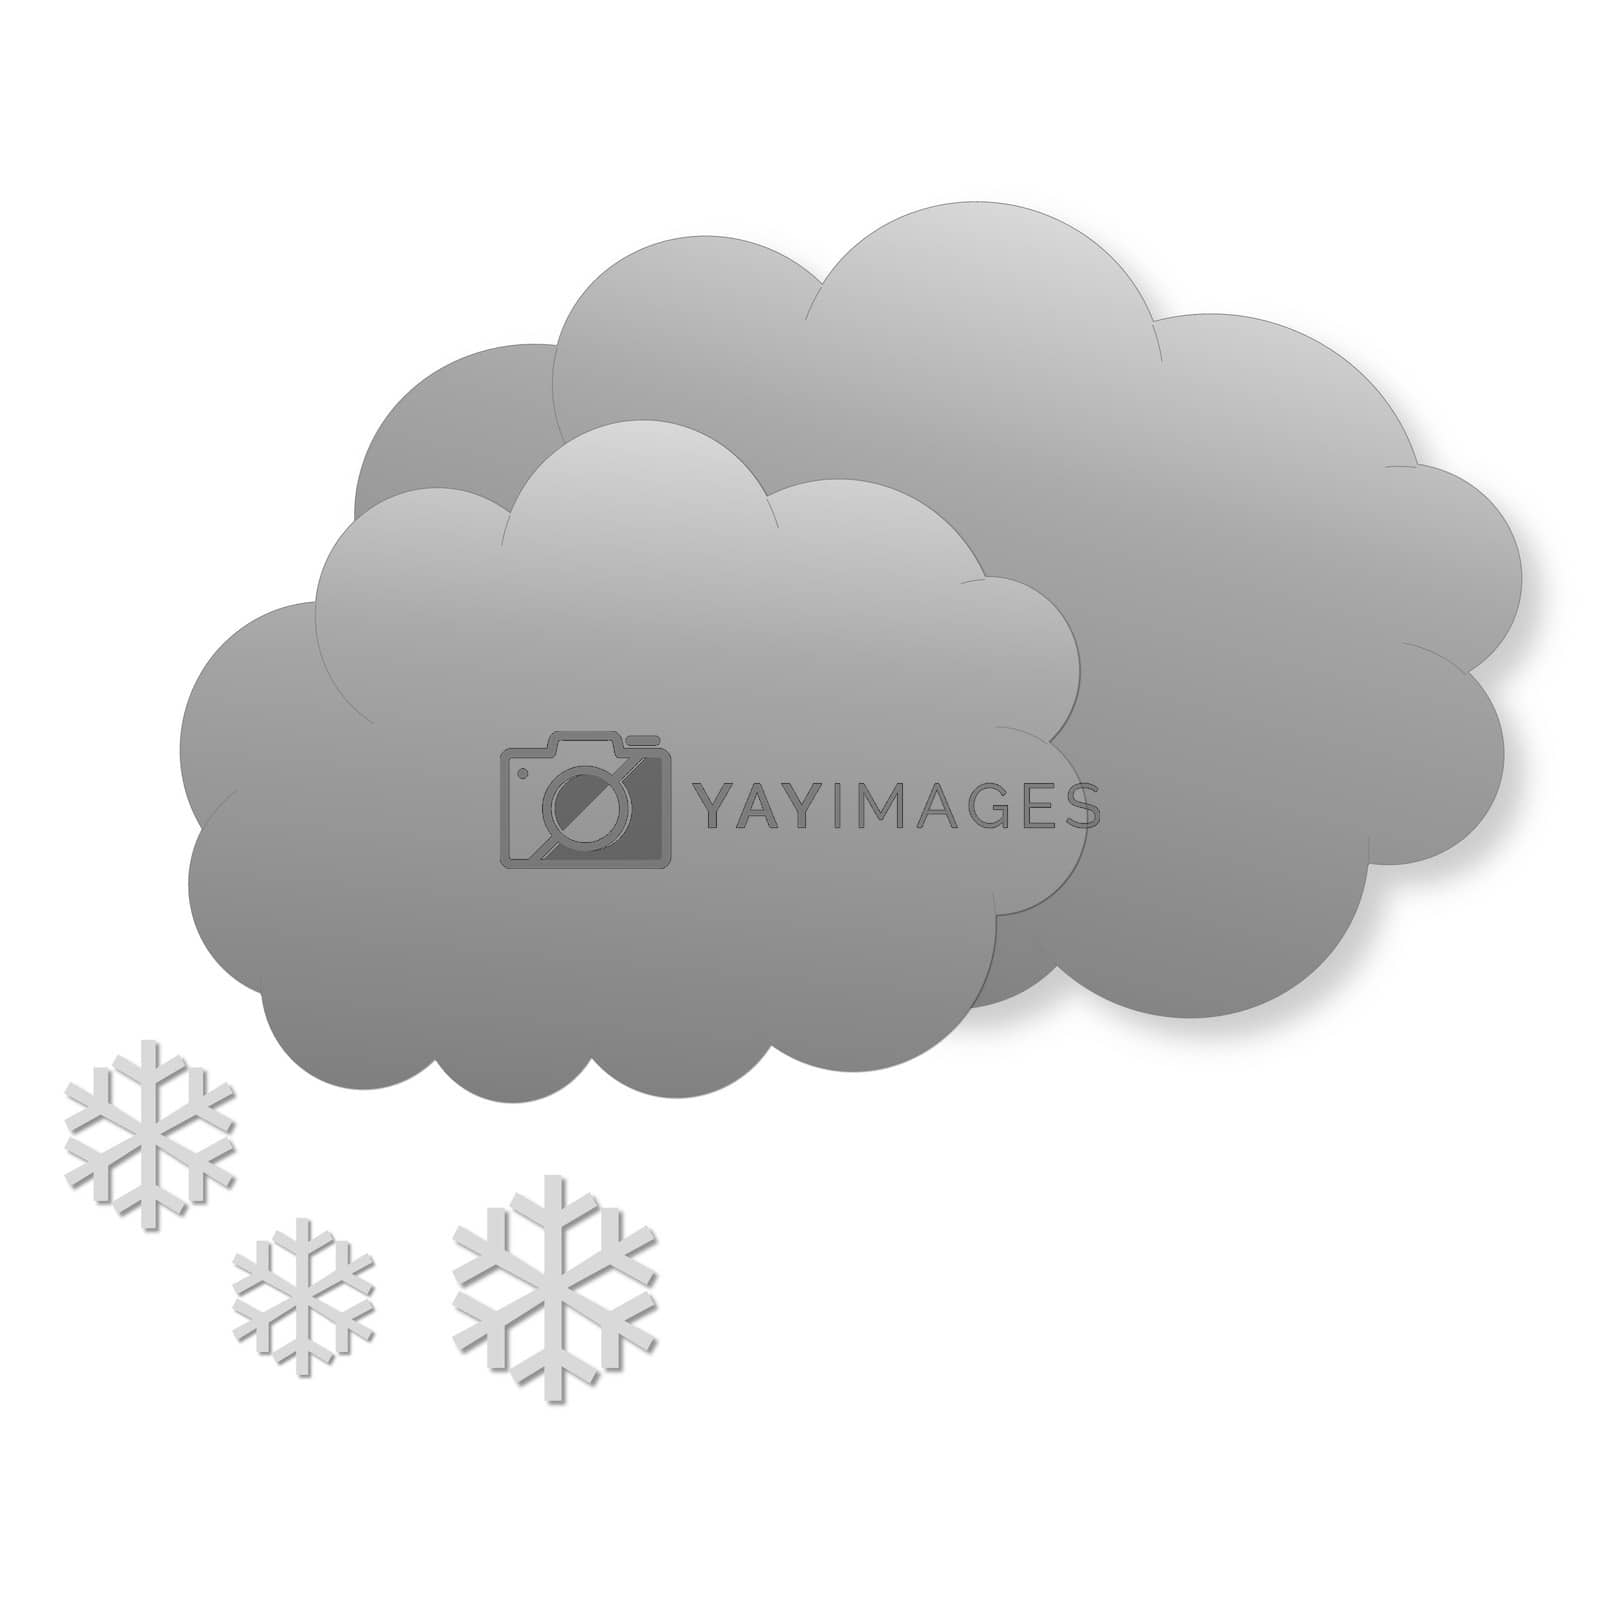 Royalty free image of Snowing day as weather icon by Elenaphotos21